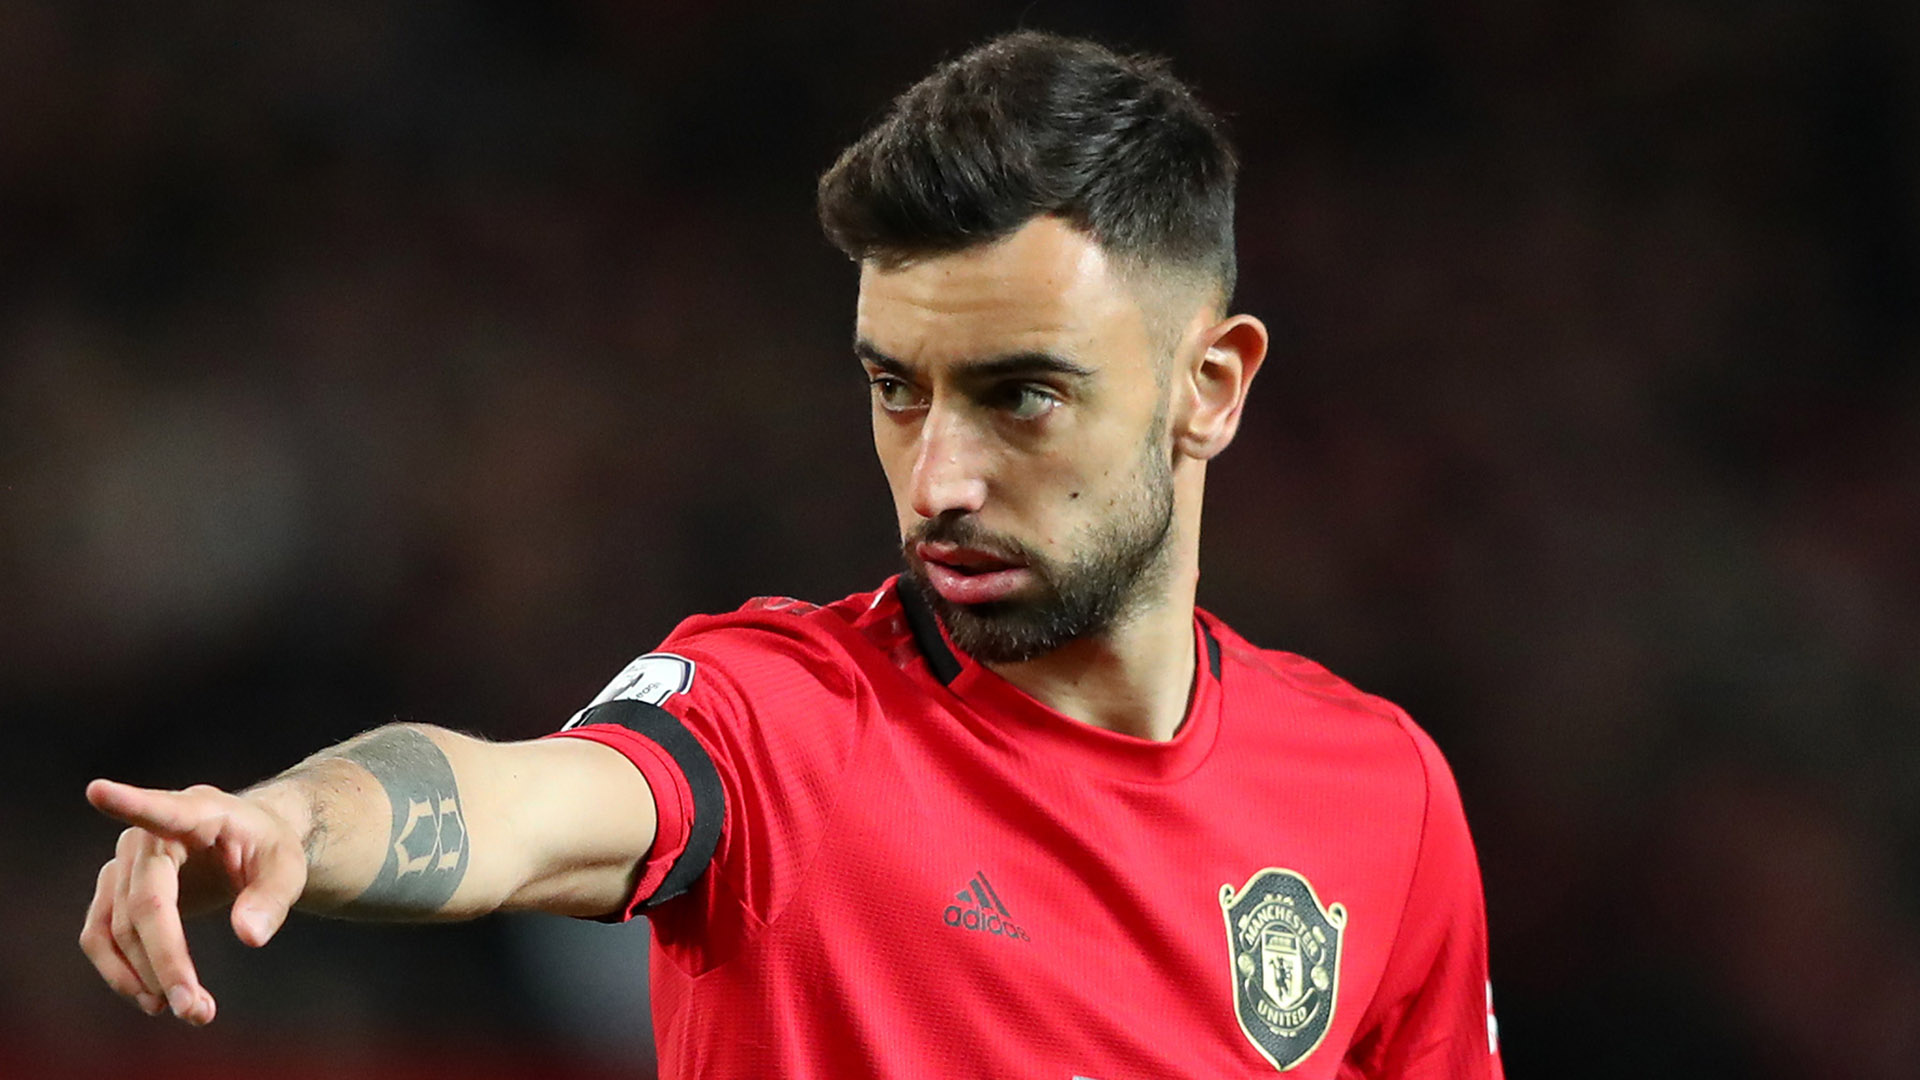 Bruno Fernandes ‘different from the others’ as risk-taker counters Pogba’s absence at Man Utd